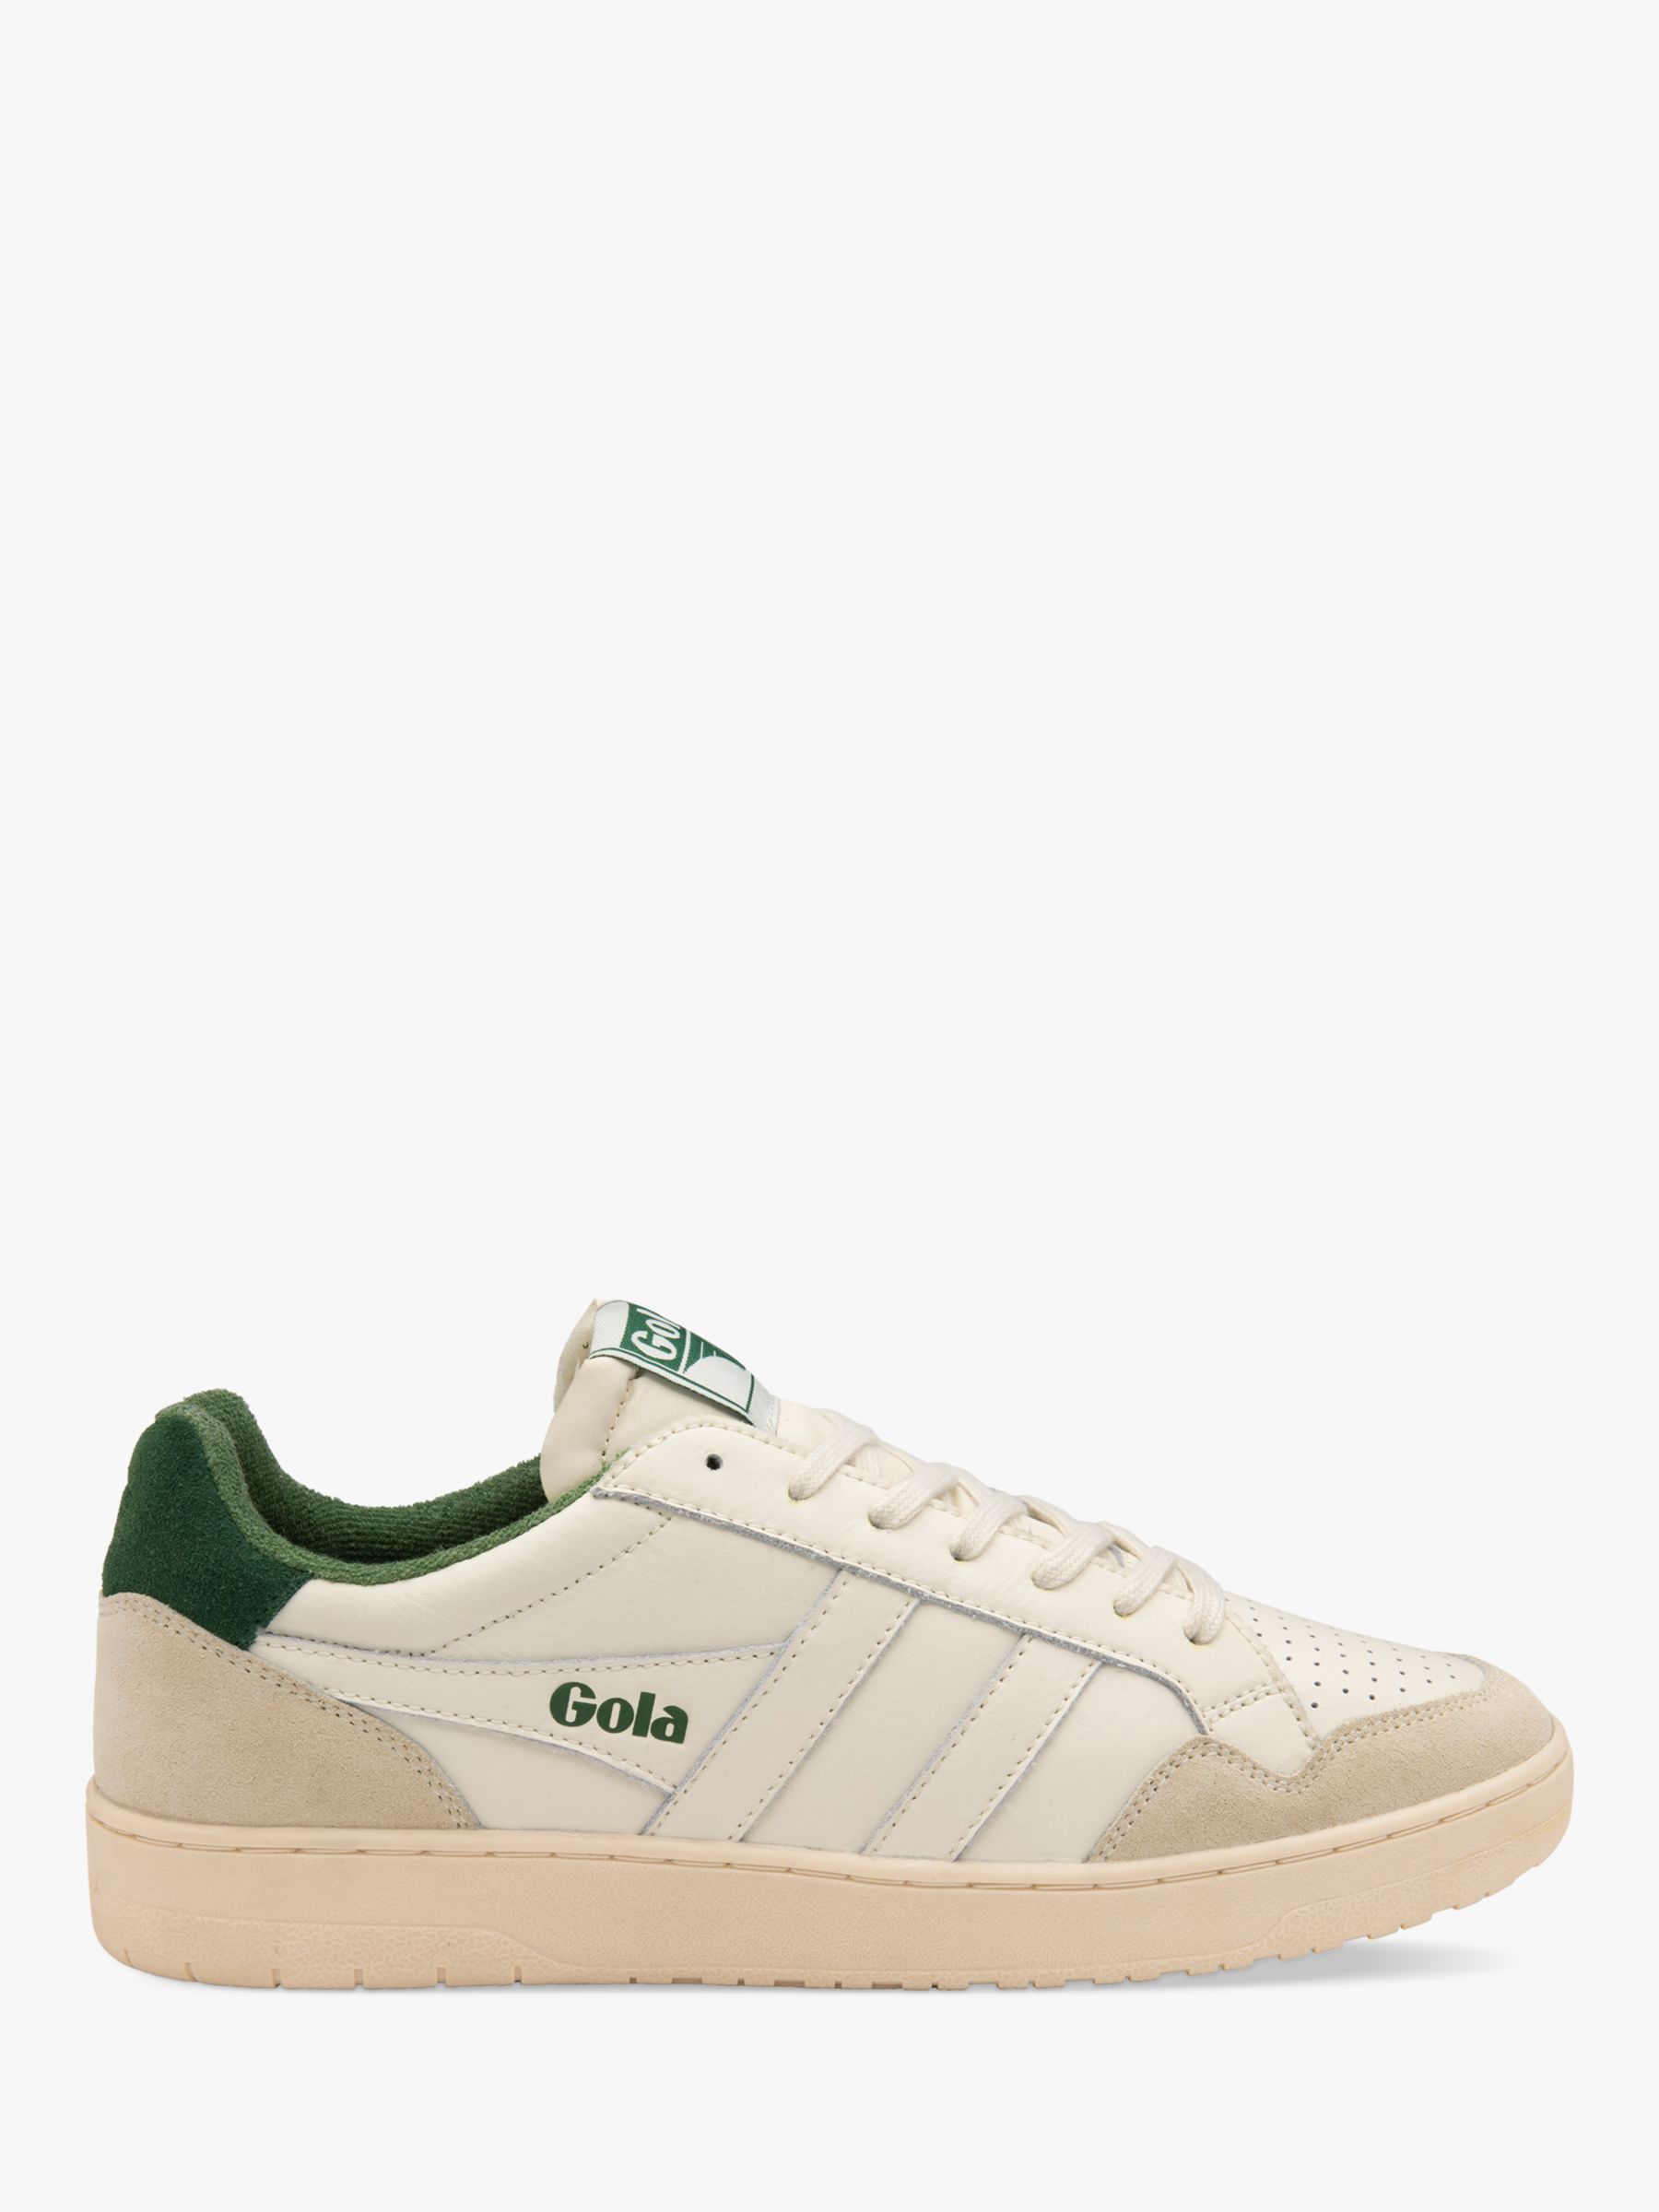 Gola Eagle Leather Lace Up Trainers, Off White/Evergreen at John Lewis ...